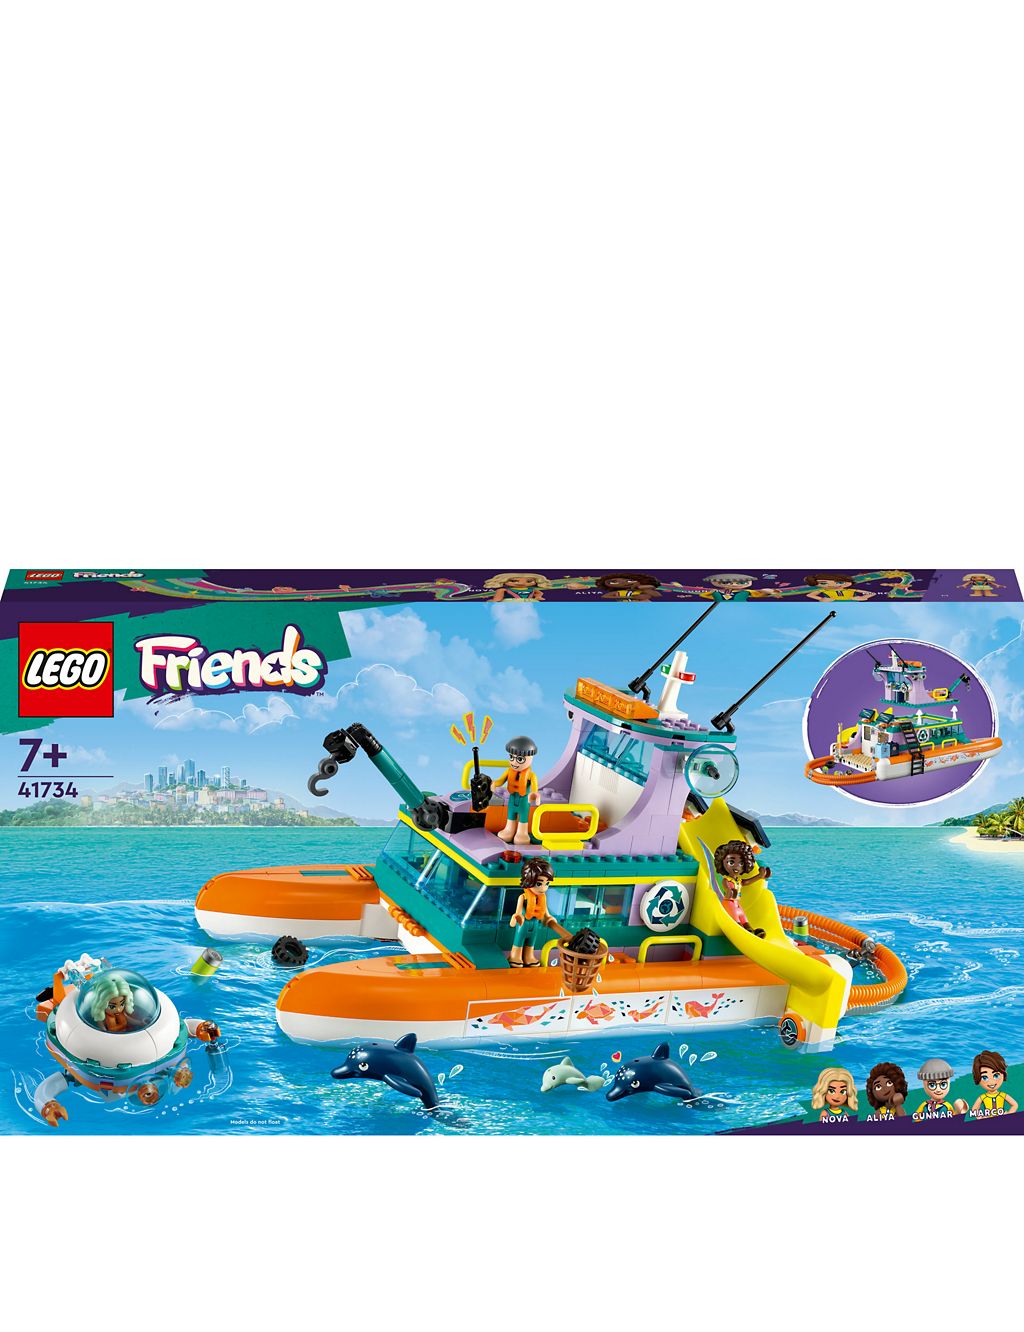 LEGO Friends Sea Rescue Boat Toy Playset 41734 (7+ Yrs) 2 of 6